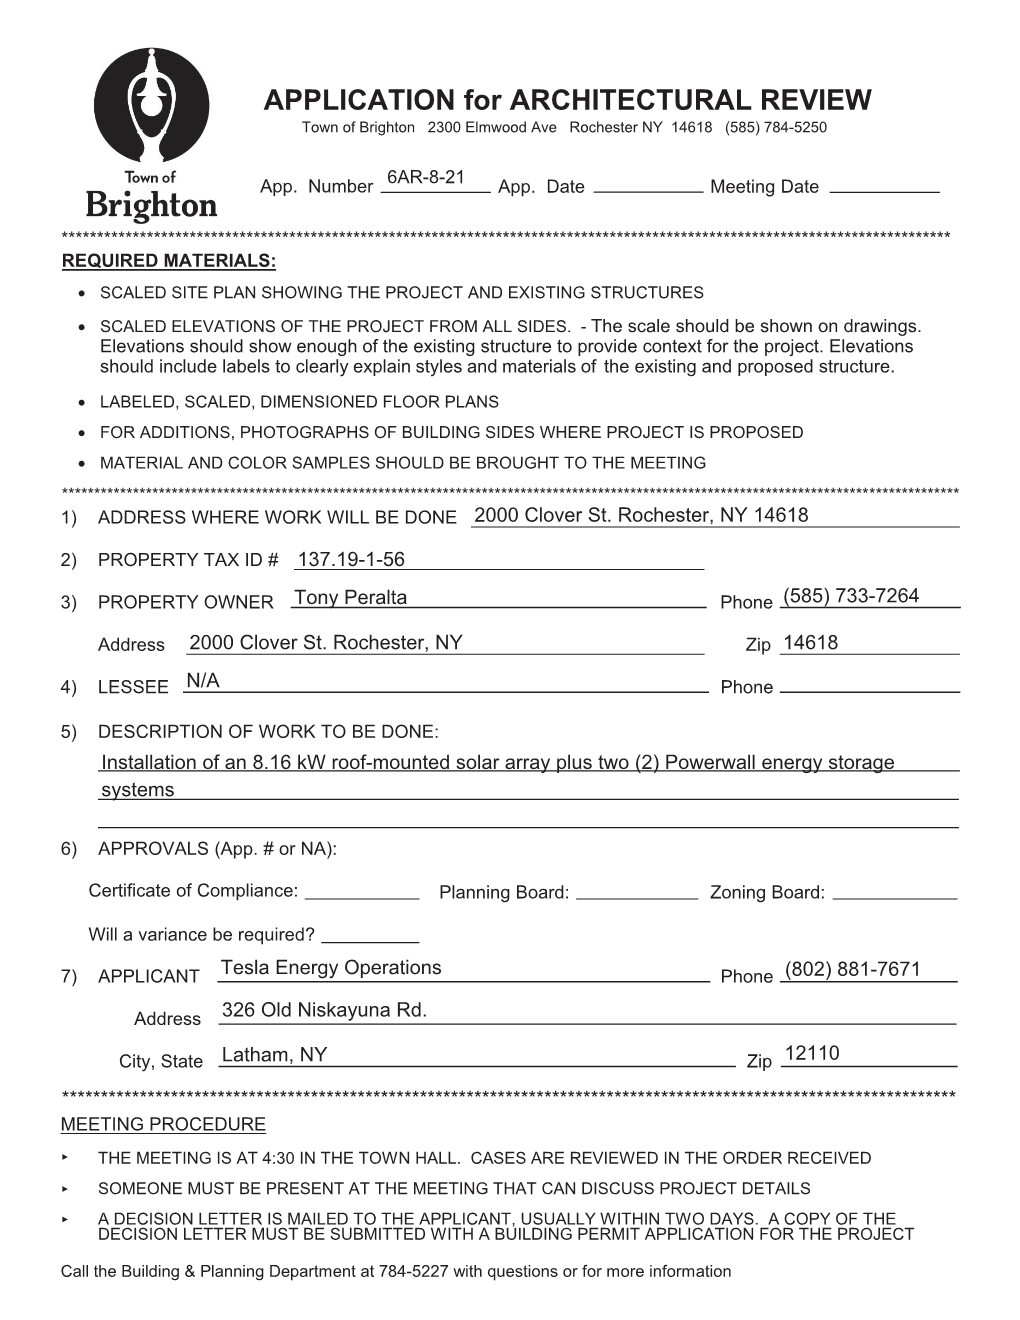 APPLICATION for ARCHITECTURAL REVIEW Town of Brighton(OPZRRG$YHRRFKHVWHU NY 14618   